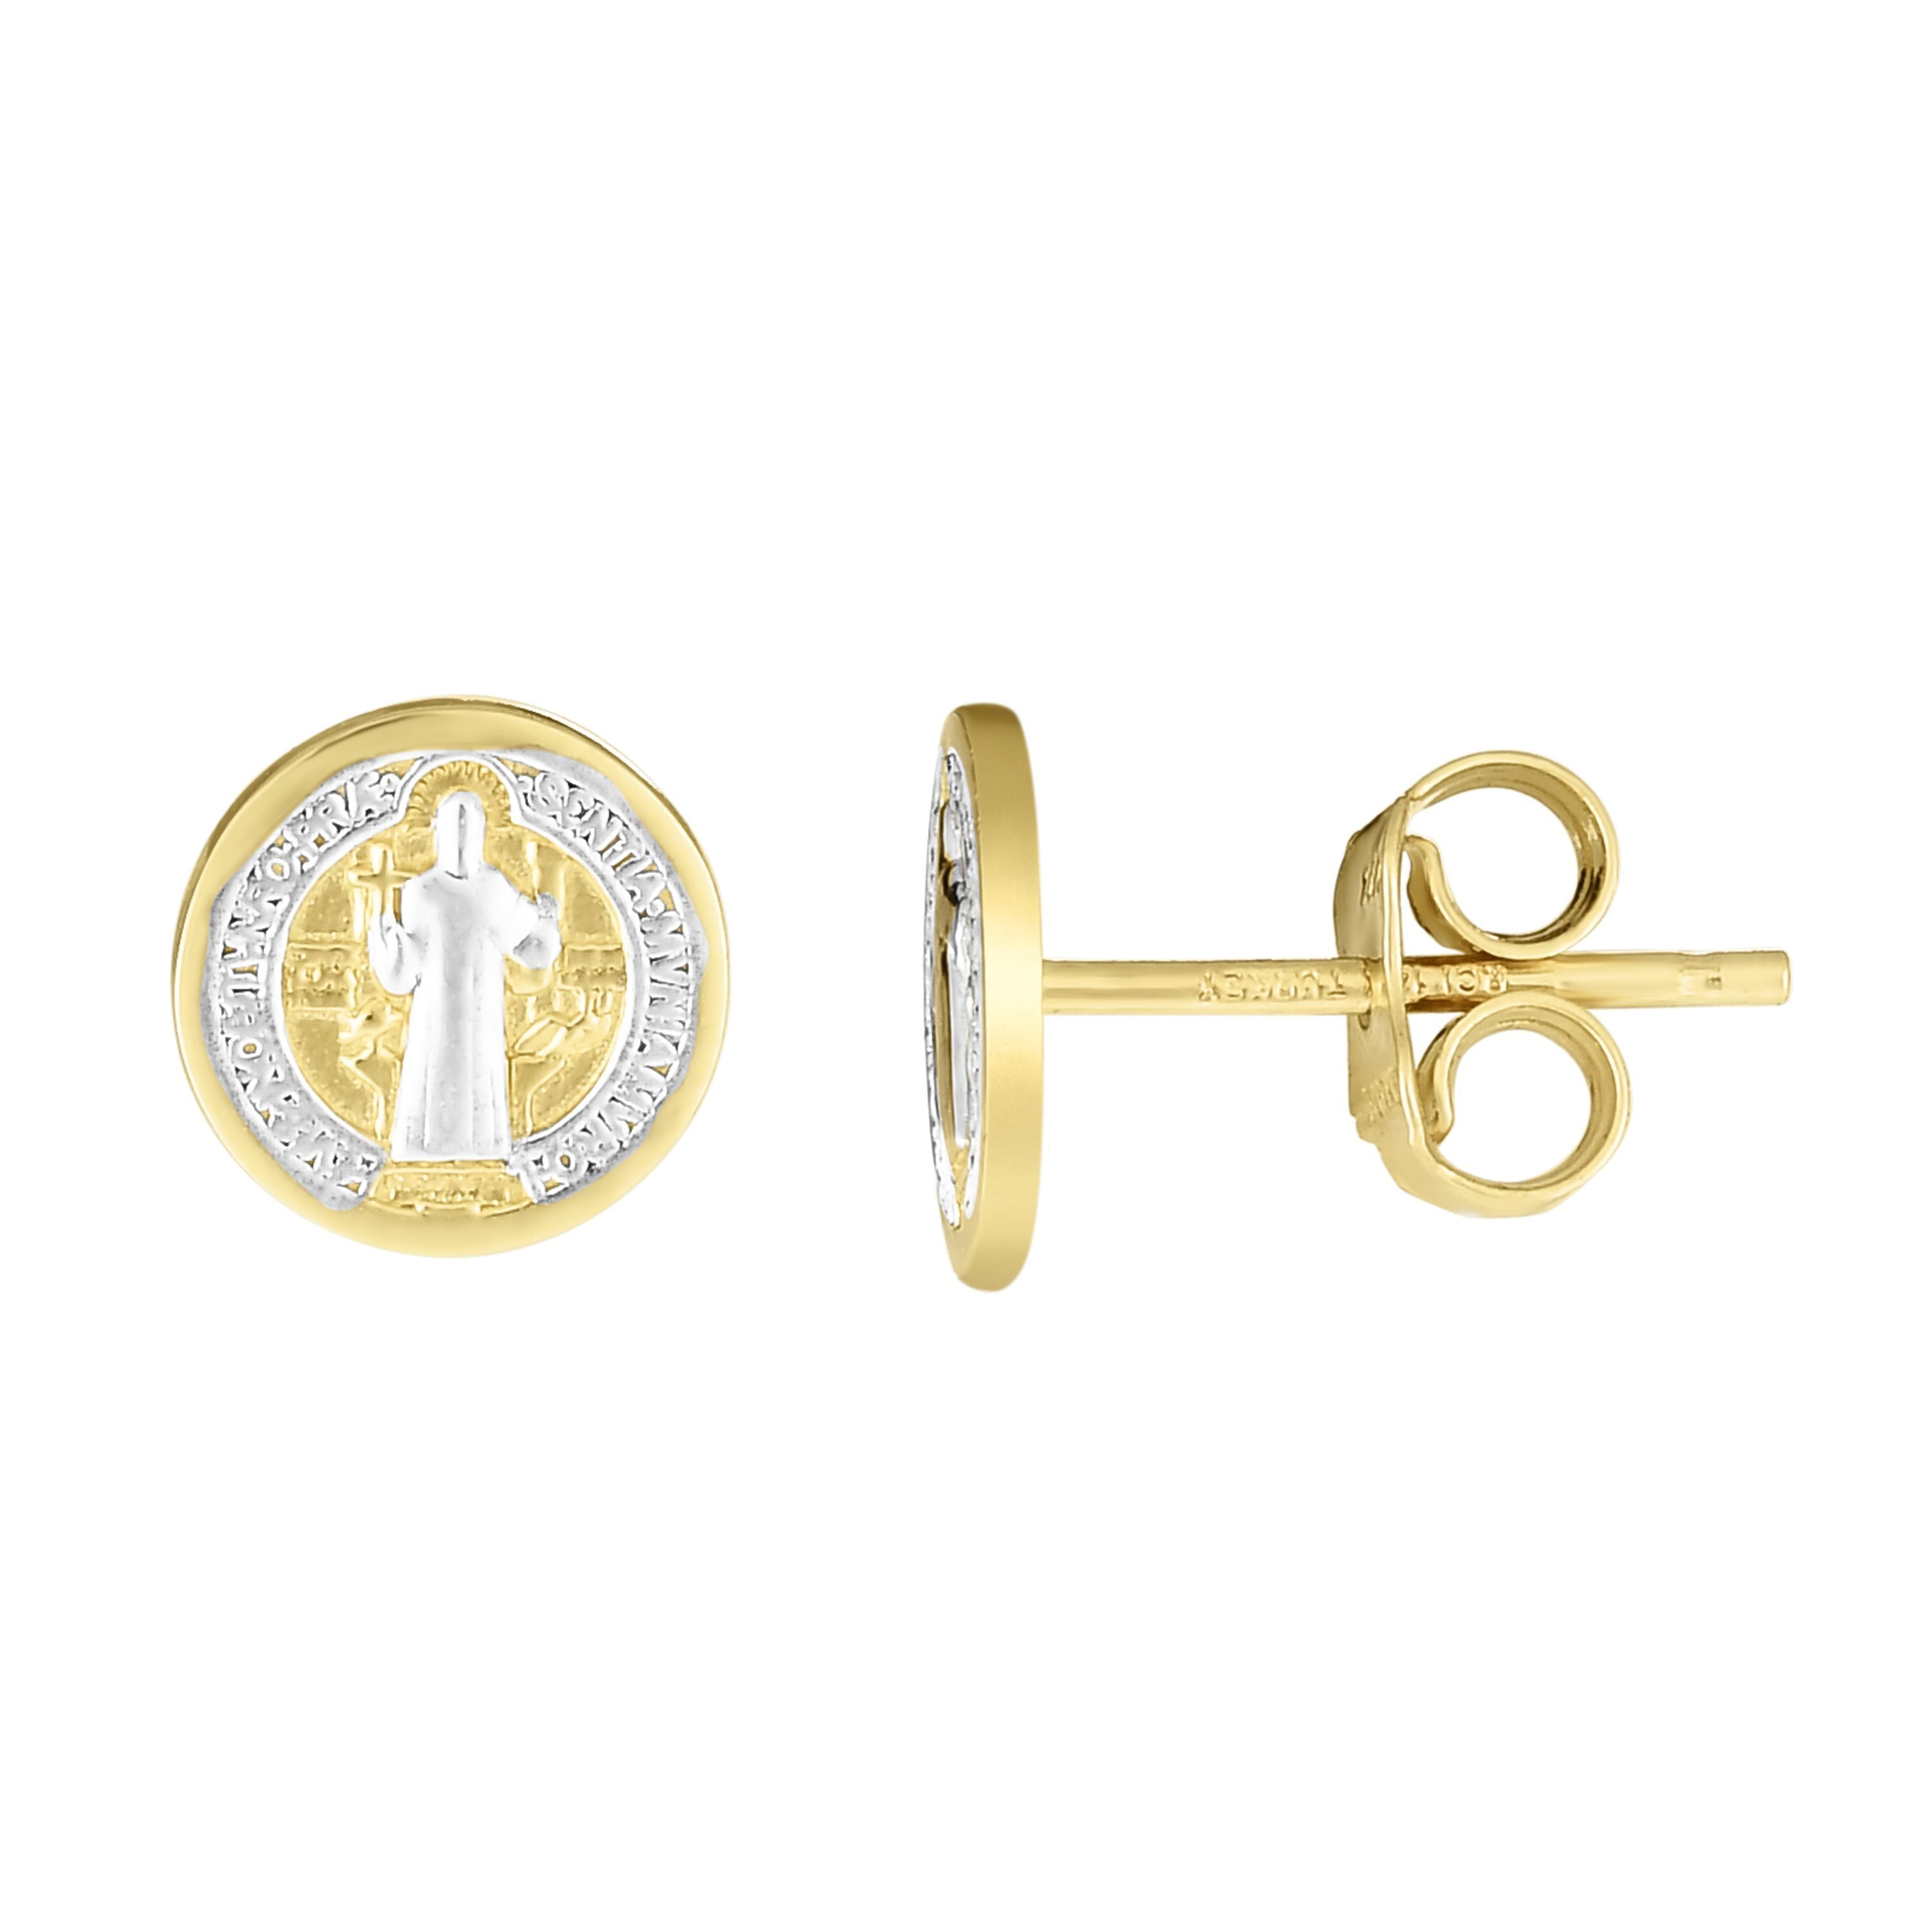 Minimalist Solid Gold Jesus Earrings with Push Back Clasp - wingroupjewelry